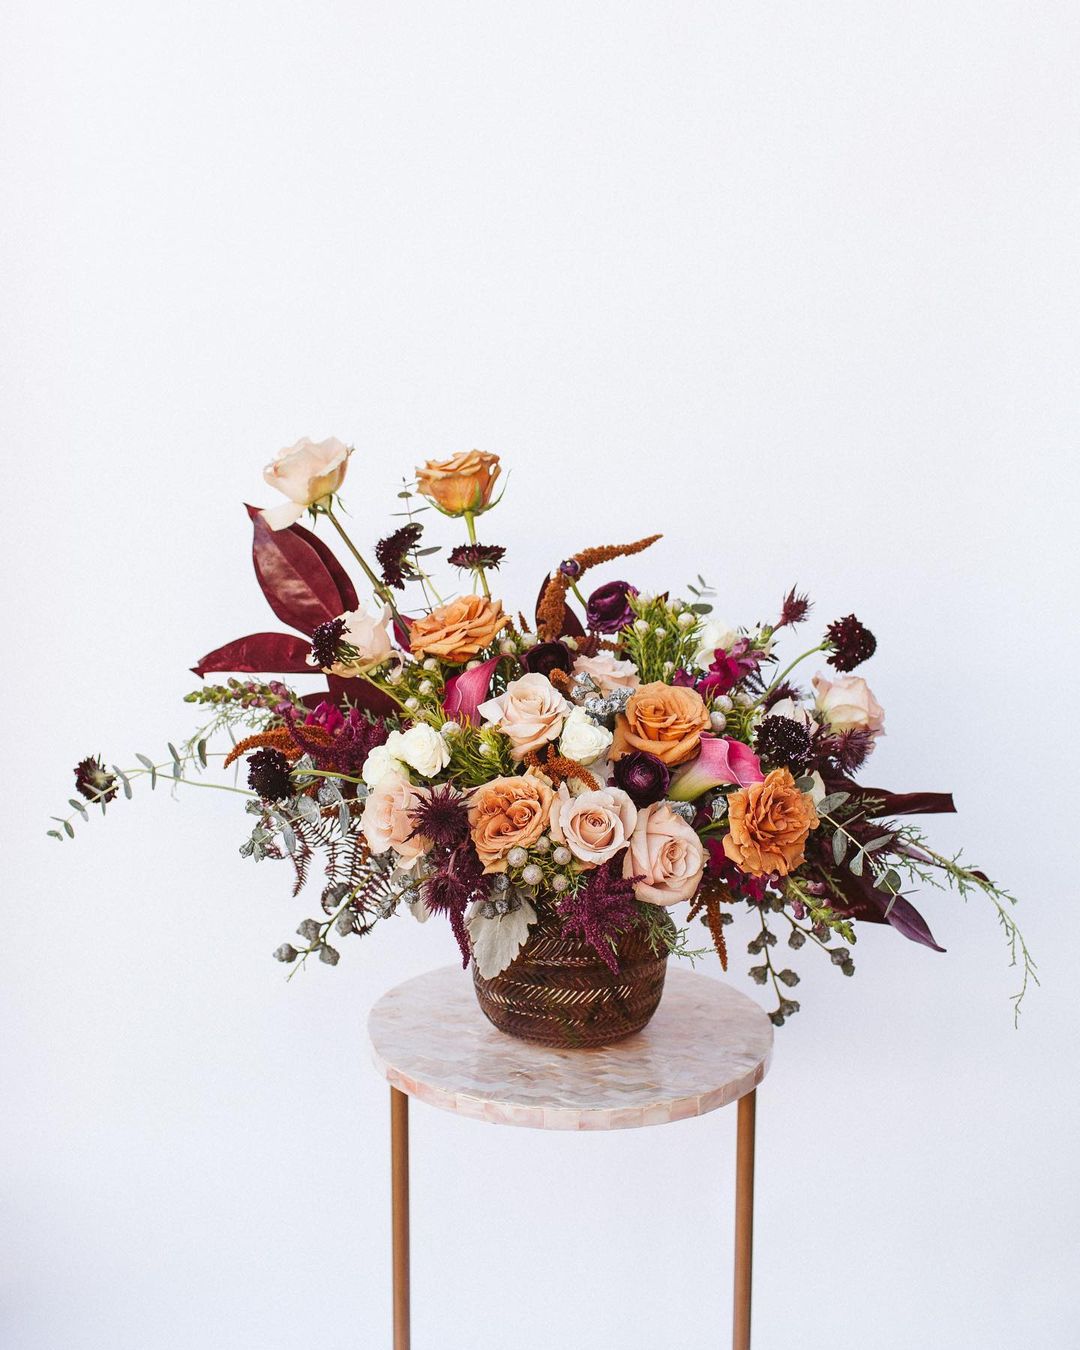 What Kind of Floral Trends Can We Expect to See in 2022? Floral Design Trends